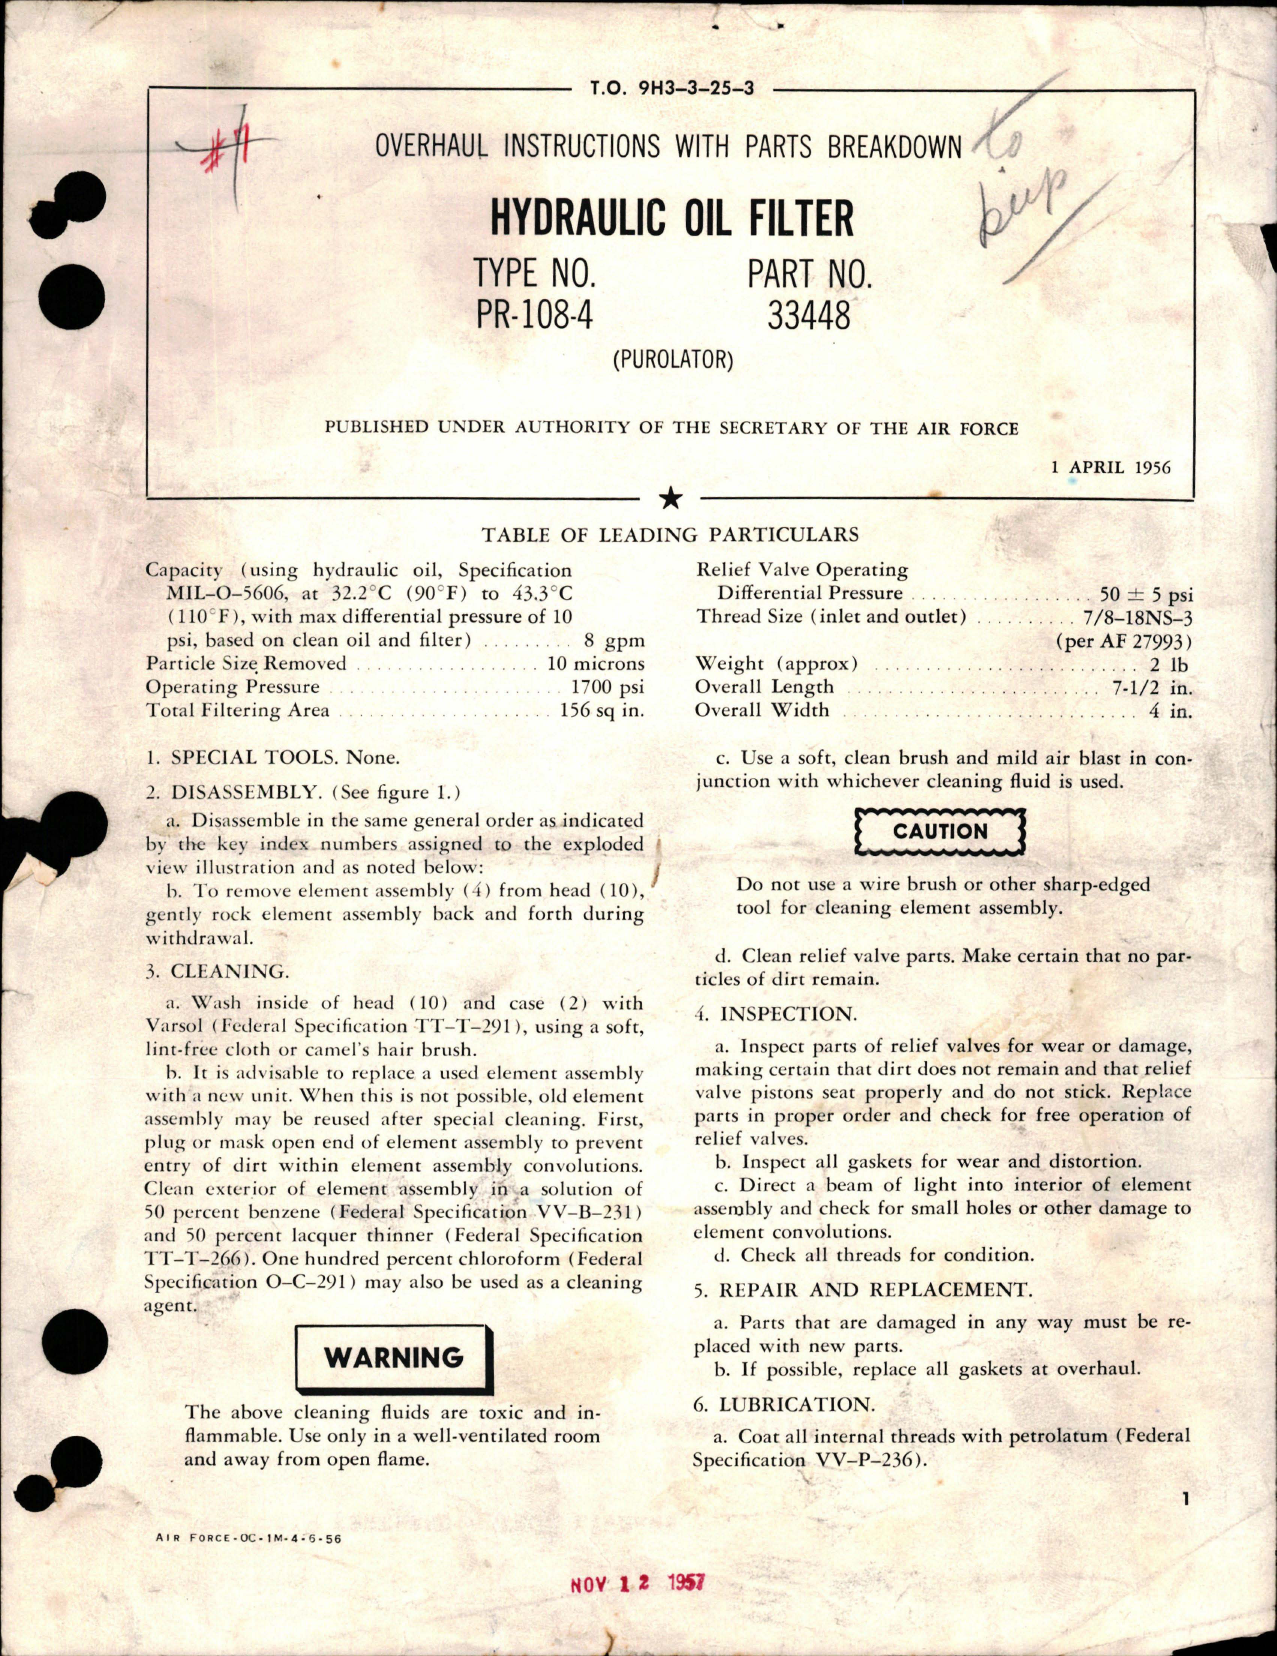 Sample page 1 from AirCorps Library document: Overhaul Instructions with Parts Breakdown for Hydraulic Oil Filter - Type PR-1084 - Part 33448